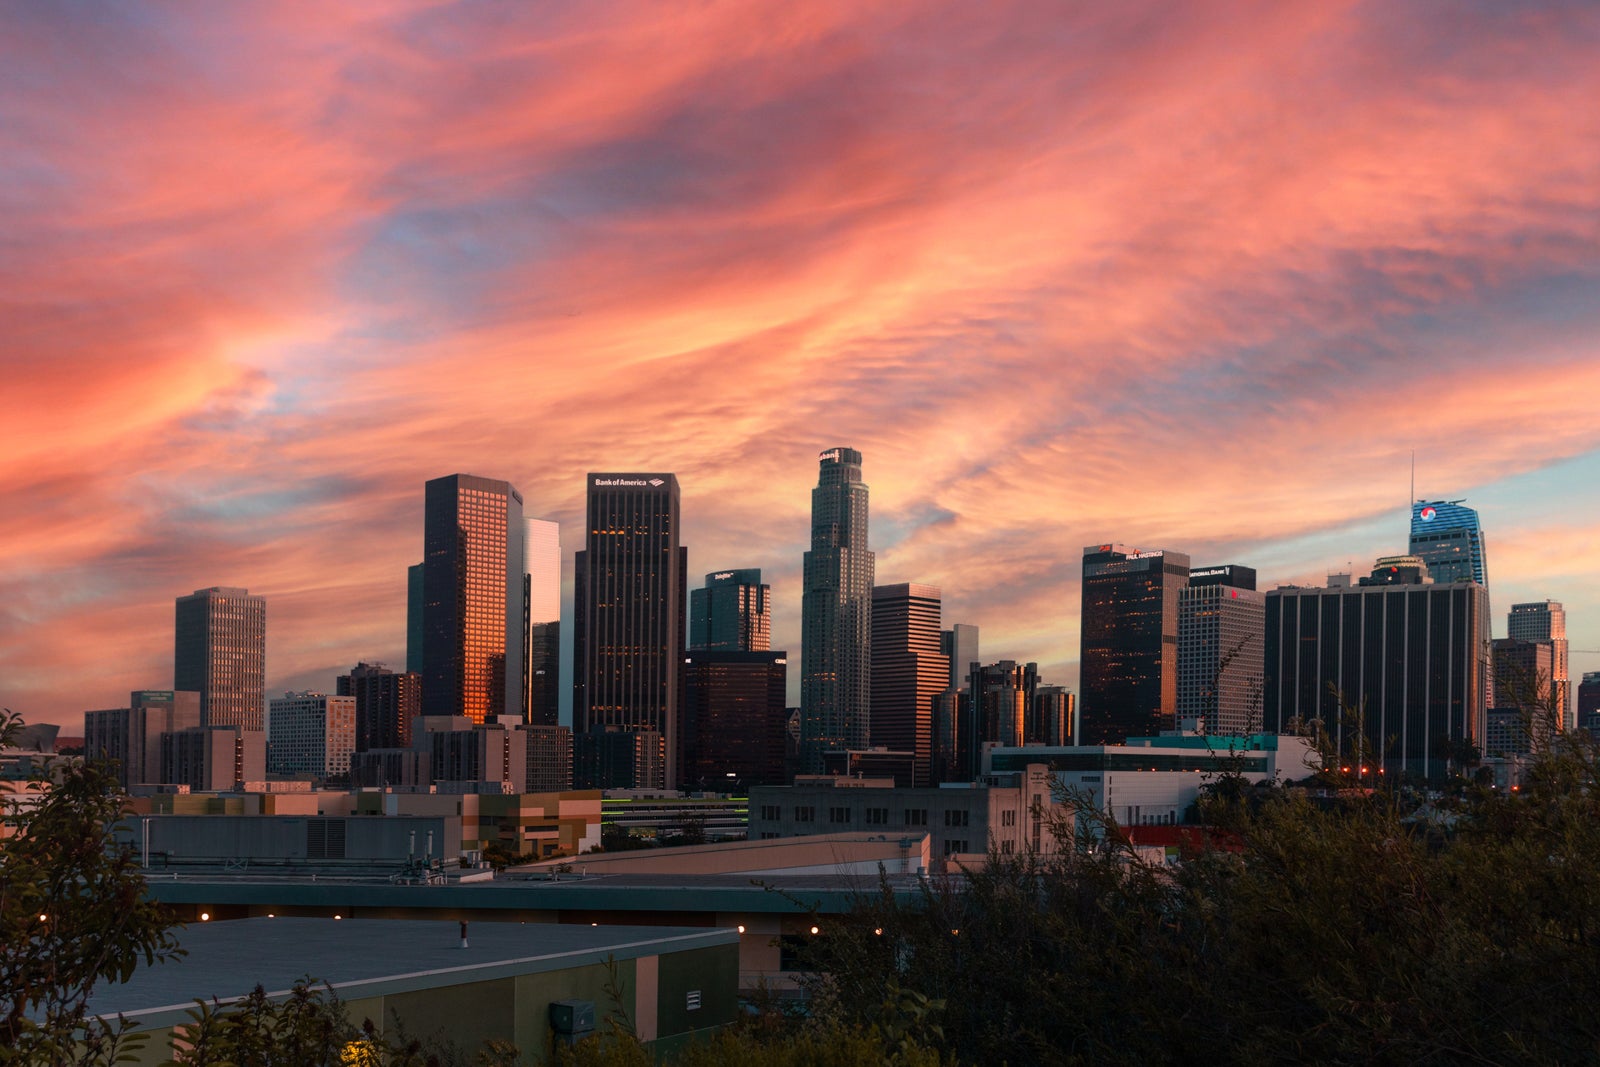 DTLA at sunset with a pink color sky